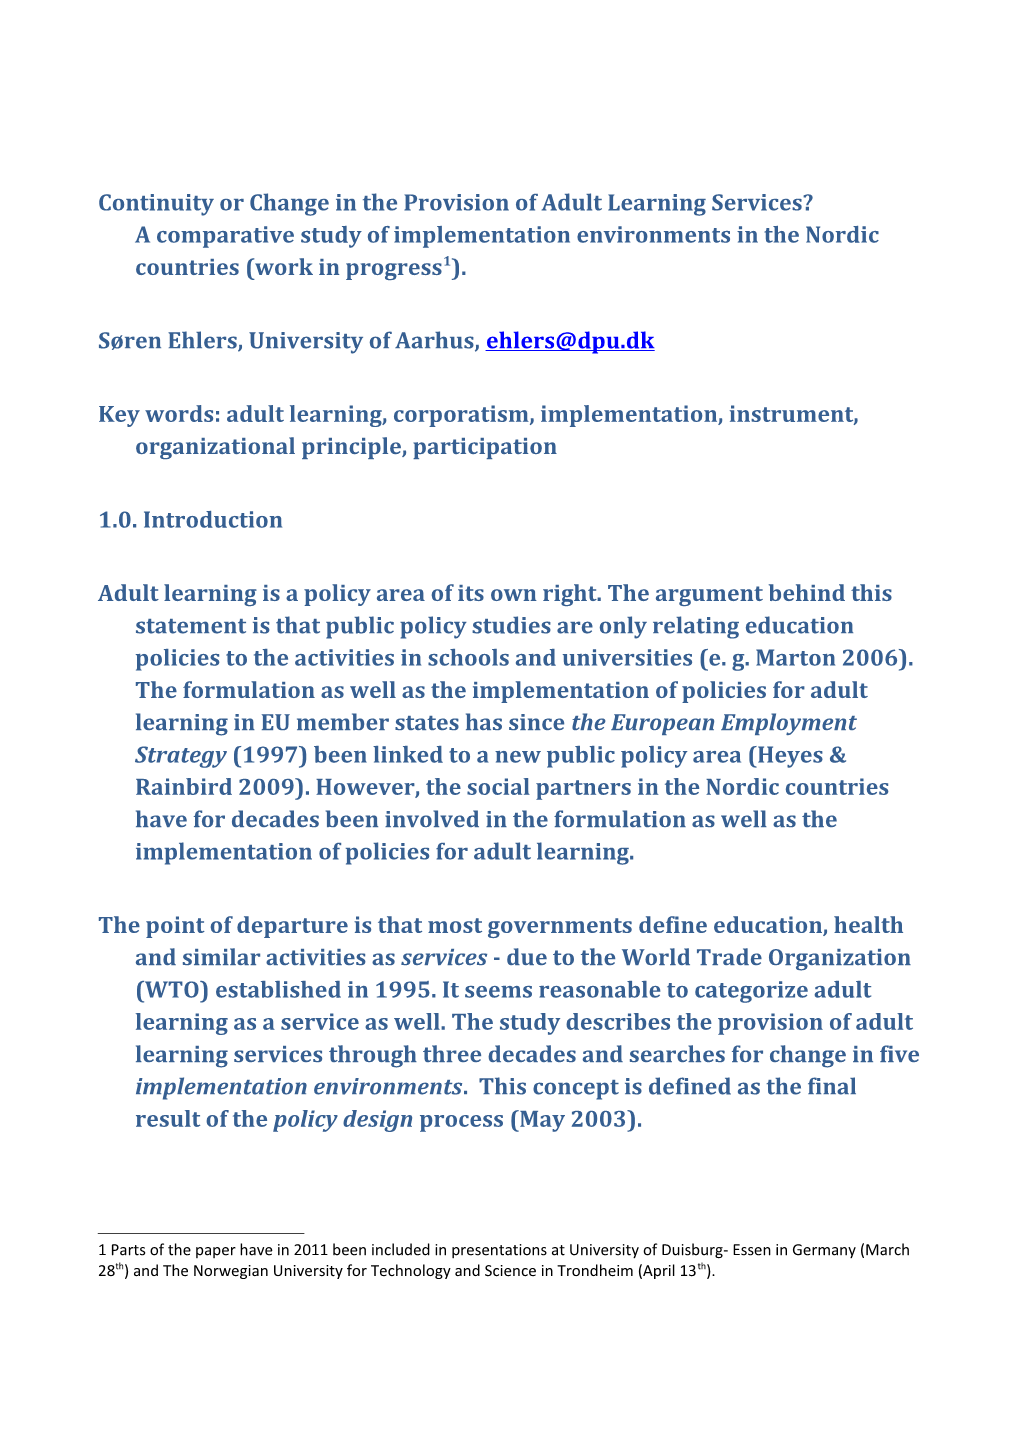 Continuity Or Change in the Provision of Adult Learning Services?